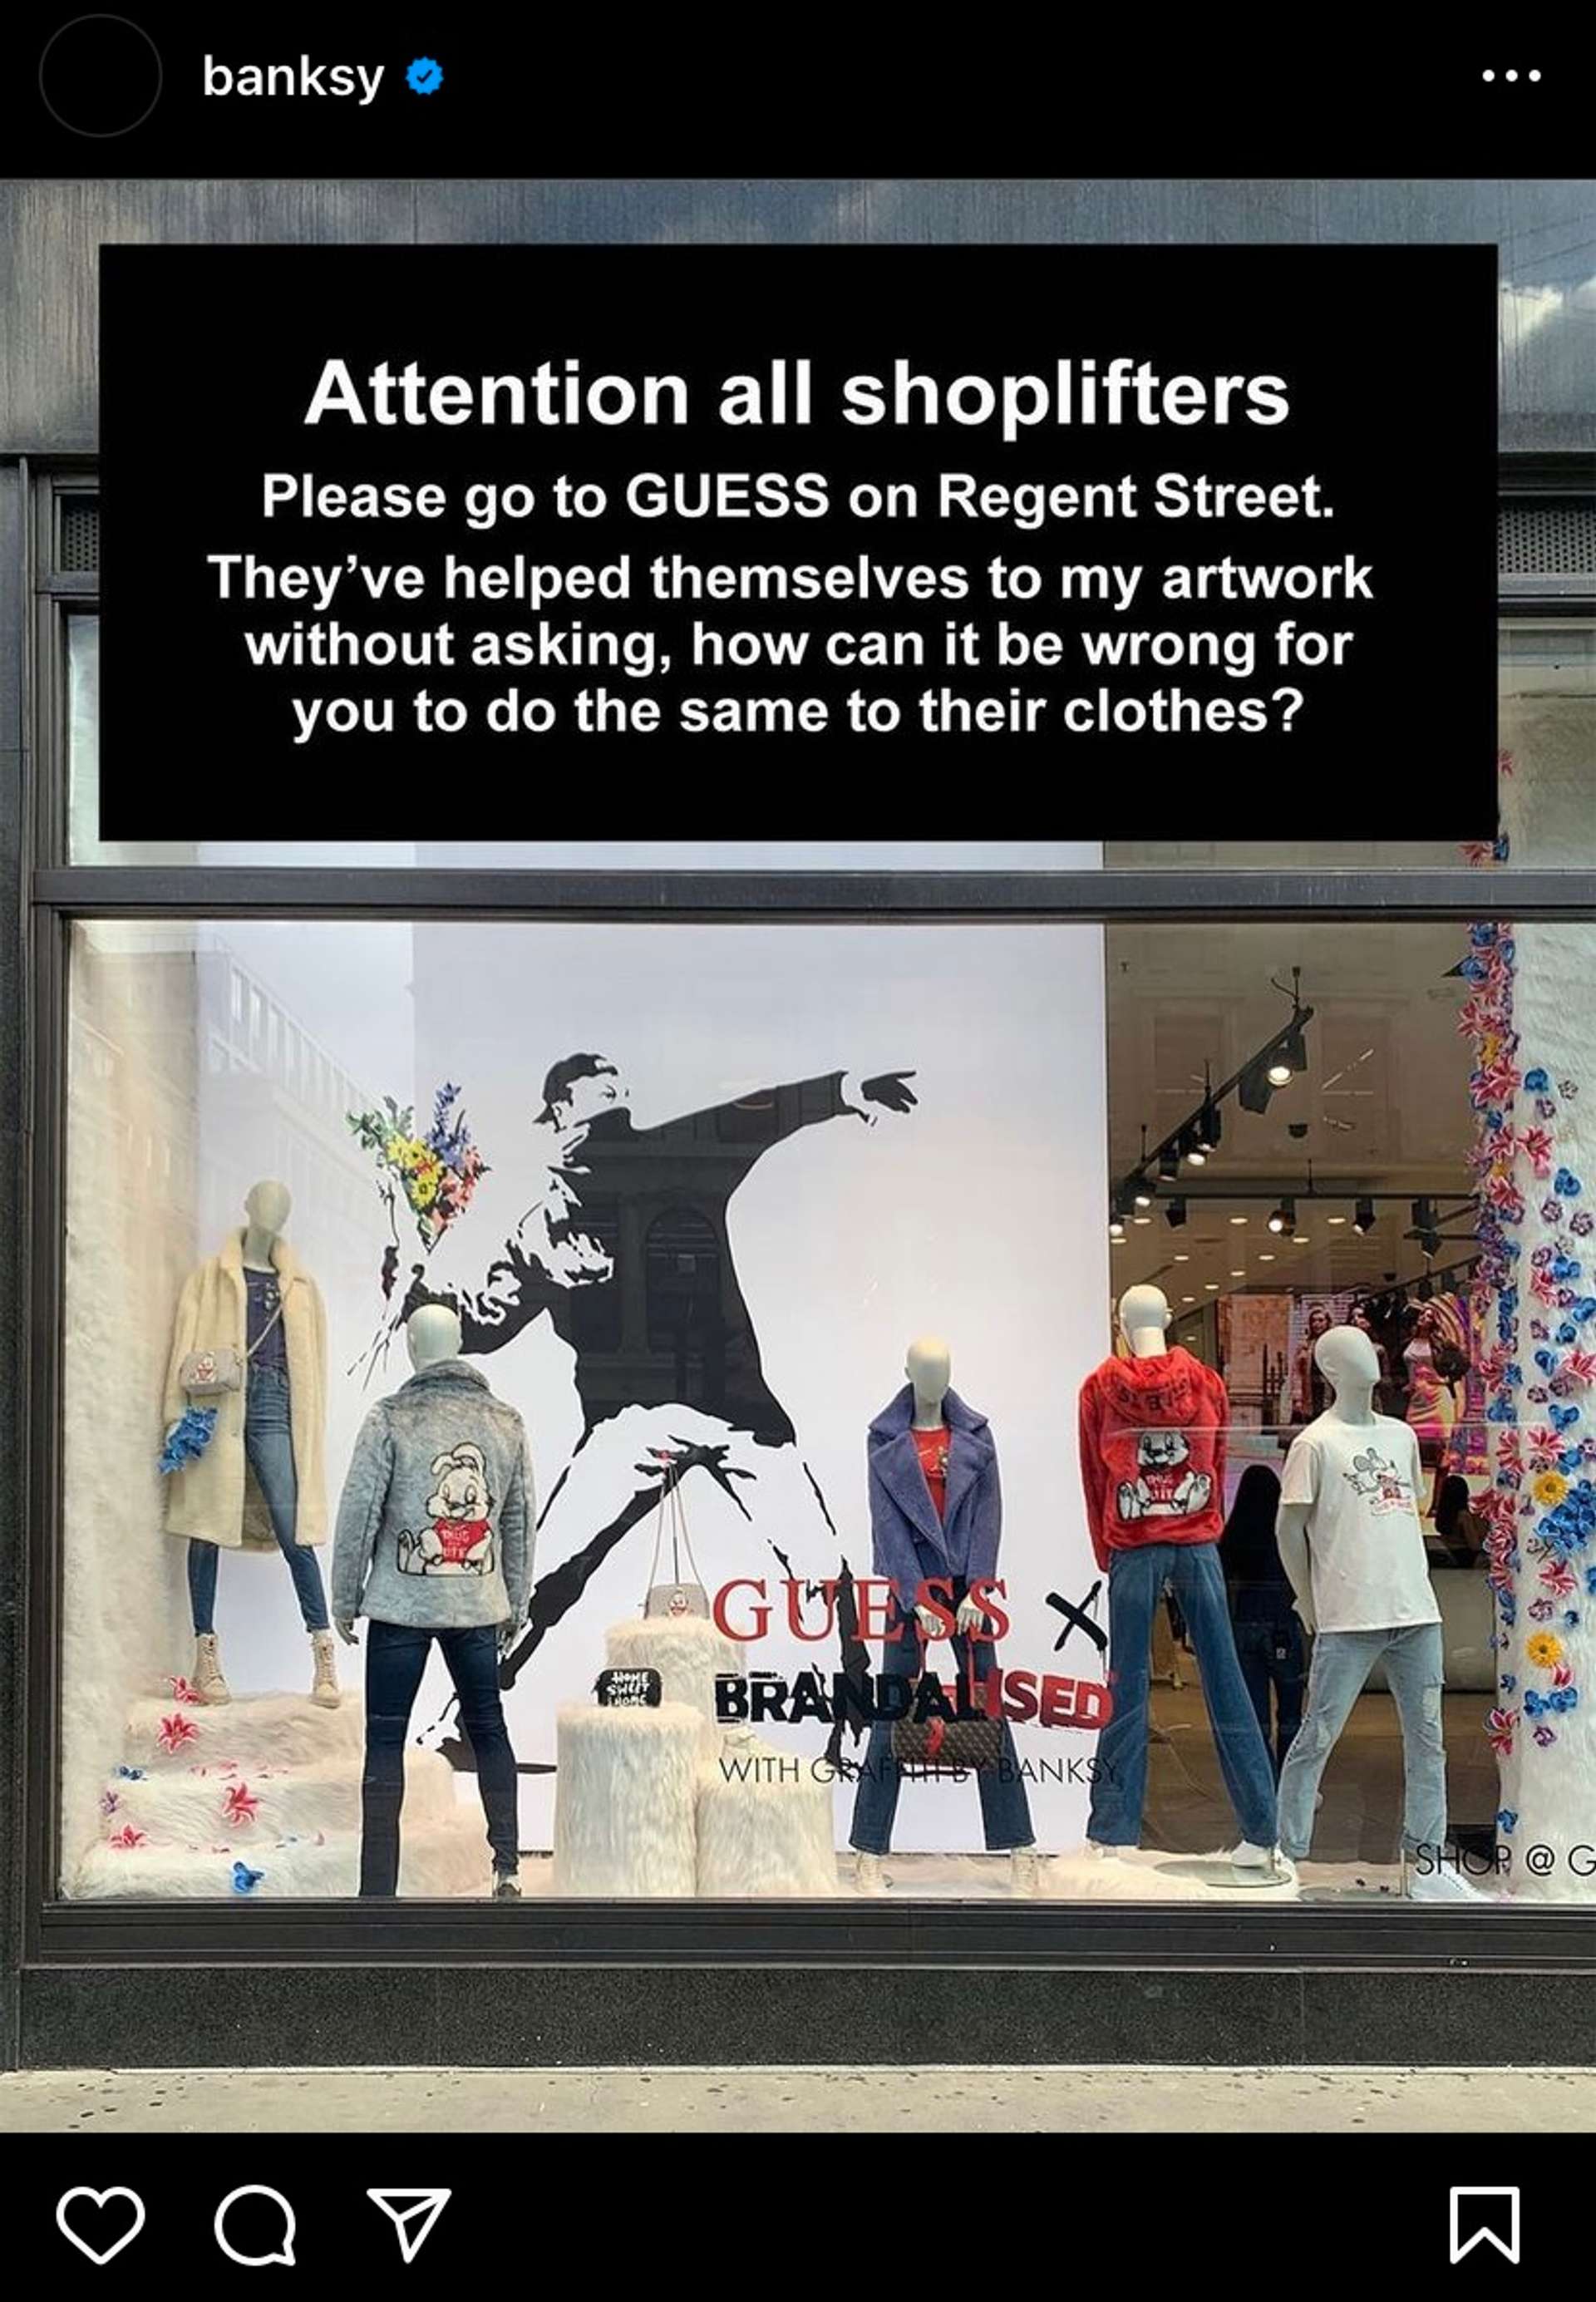 A screen shot from Banksy's instagram post showing the storefront of GUESS which has used his iconic motif of a spray painted man throwing a bunch of flowers as a backdrop to their mannequins in the window